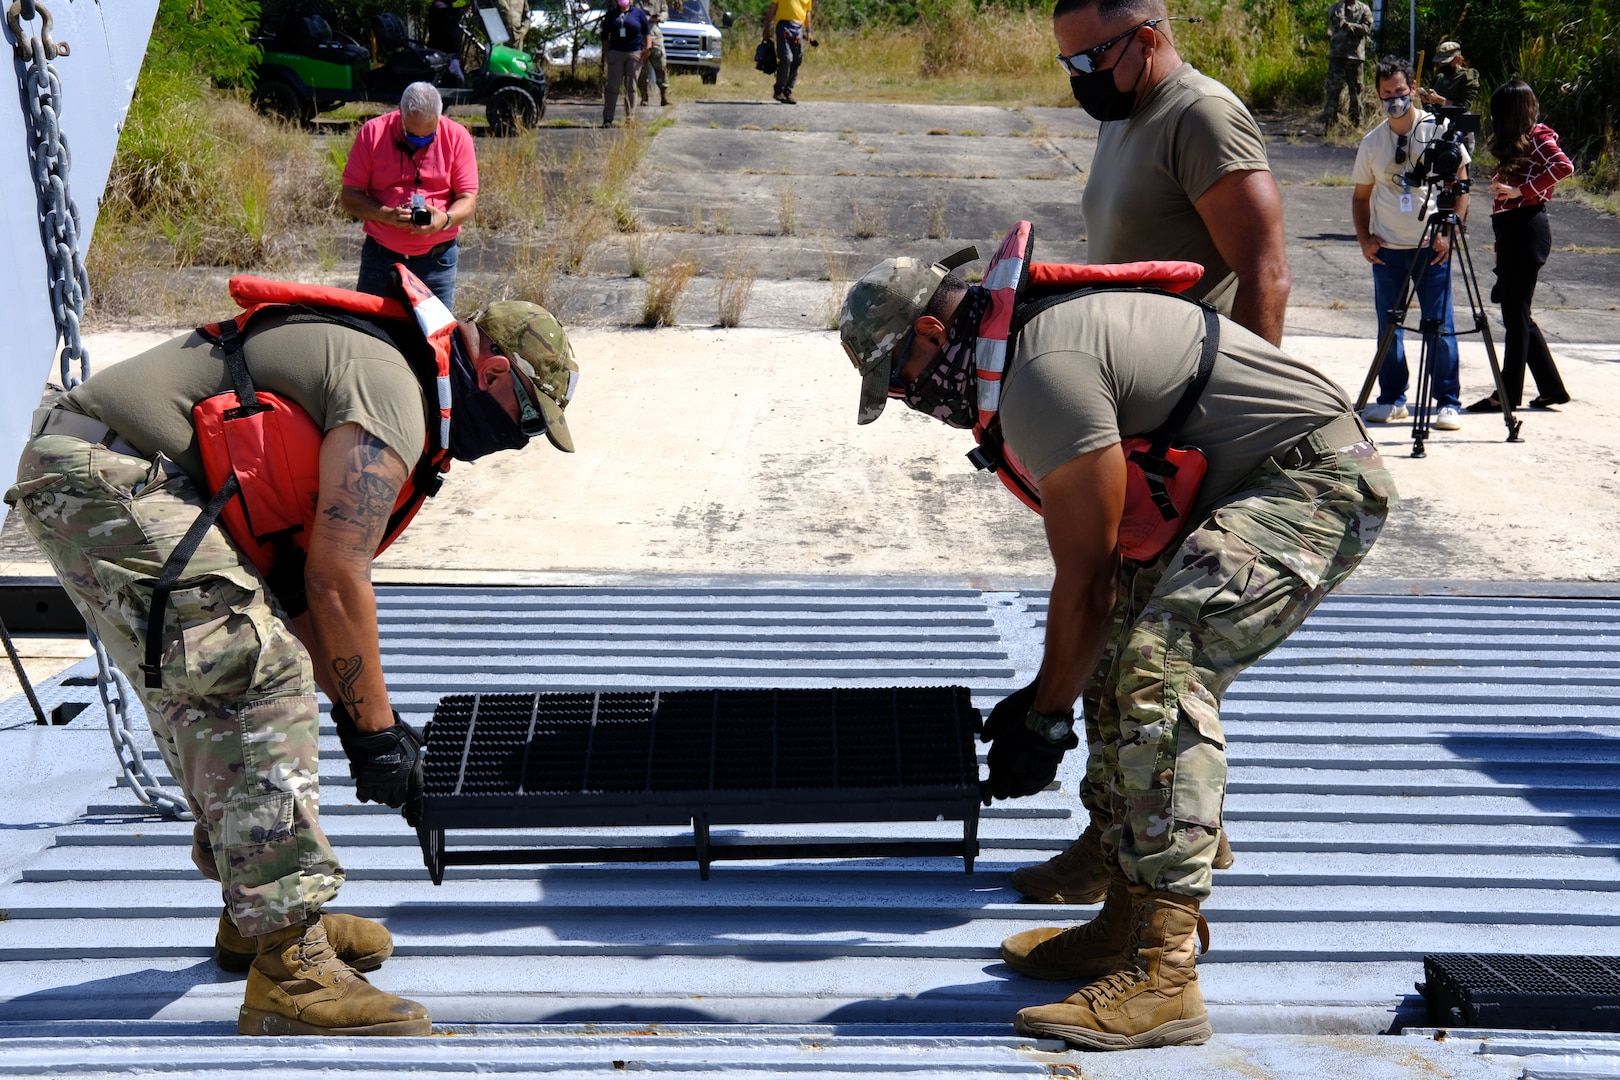 Puerto Rico National Guard Soldiers assigned to Joint Task Force - Puerto Rico set up a railing for vehicle transport on the Mechanized Landing Craft at the Maritime Transport Authority Port at Ceiba, Puerto Rico, March 15, 2021. The PRNG is helping transport medical supplies and other vital goods during the COVID-19 pandemic.